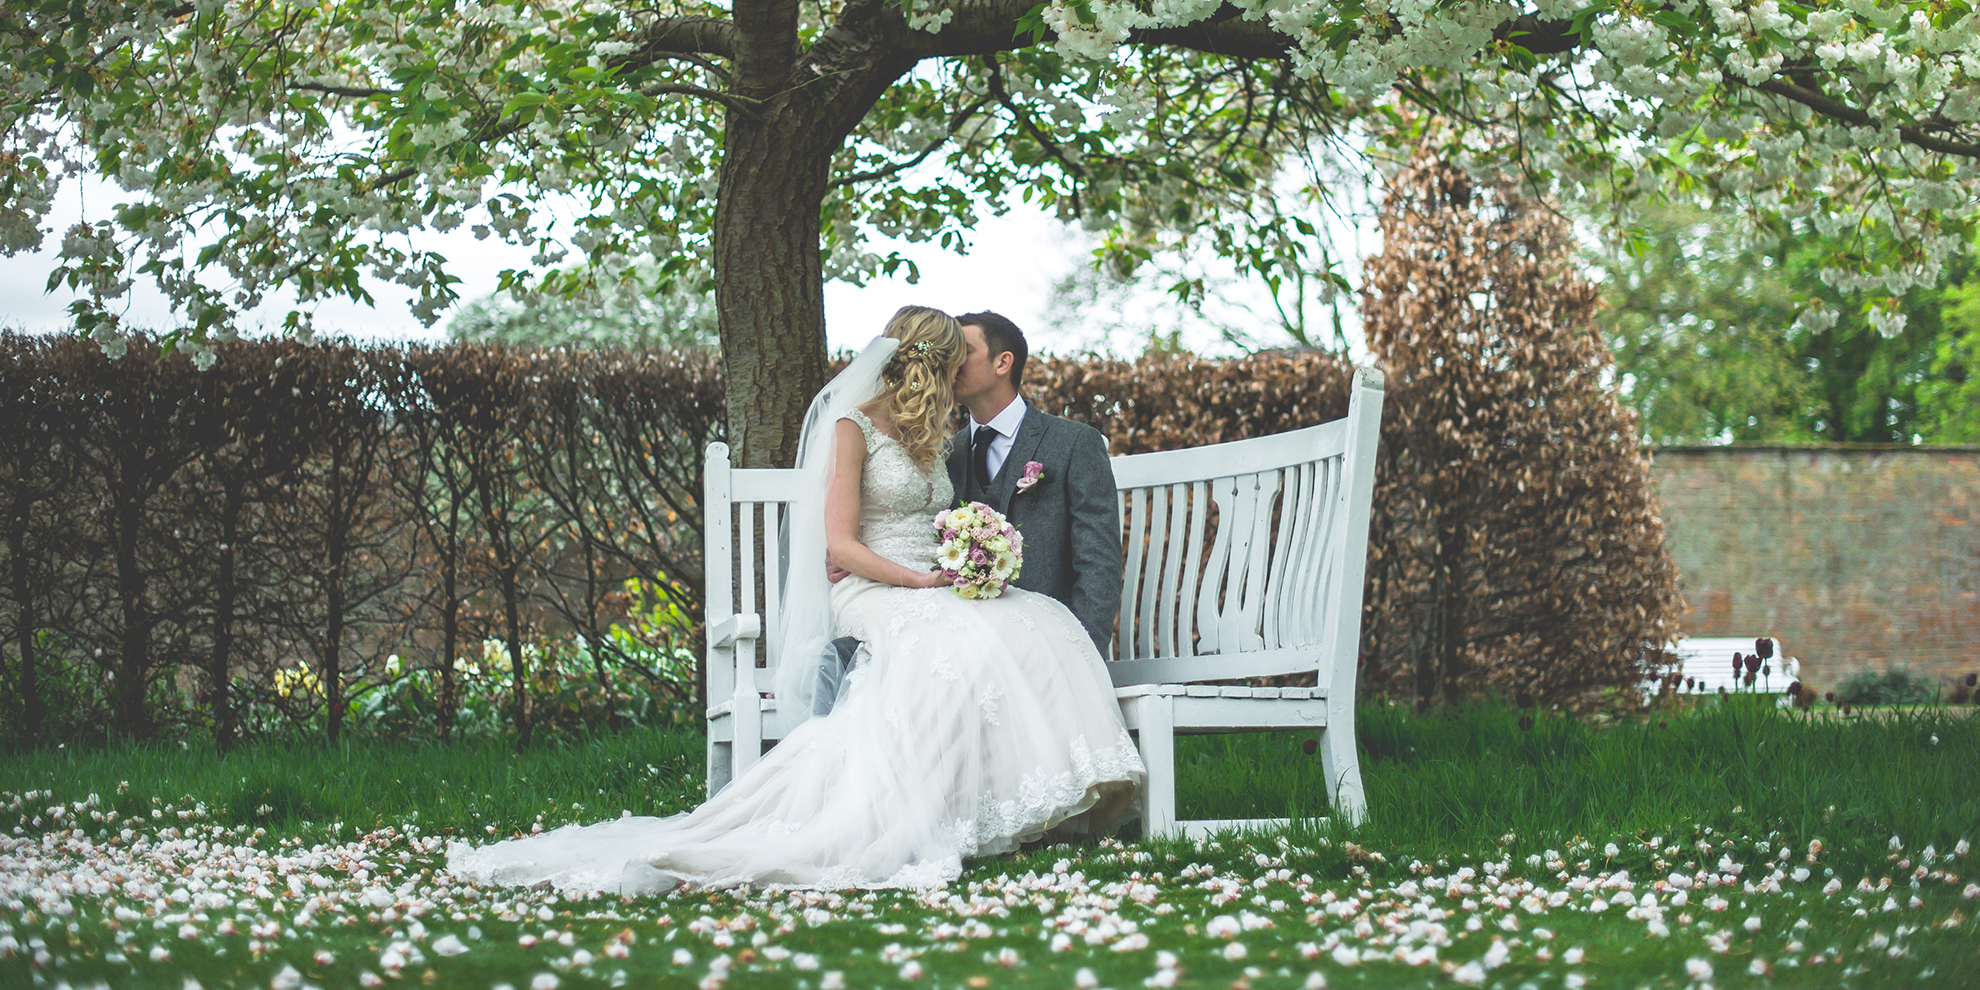 The newlyweds sit on a white bench in the Walled Garden at this stunning Shropshire wedding venue